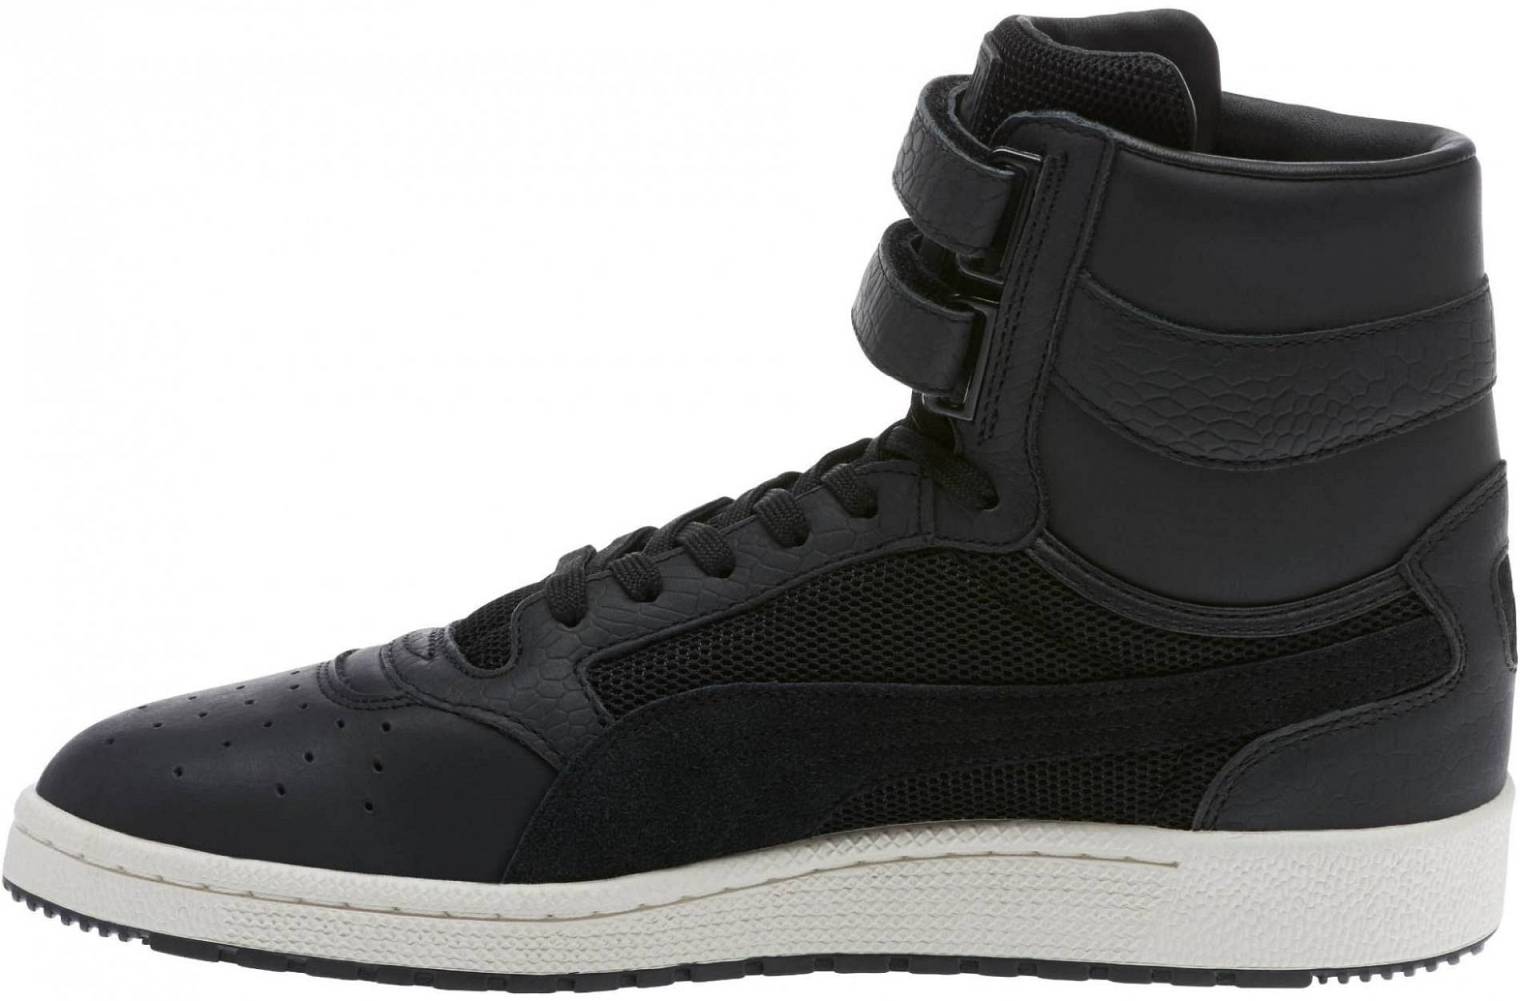 Puma Sky II Hi Colorblocked Leather – Shoes Reviews & Reasons To Buy